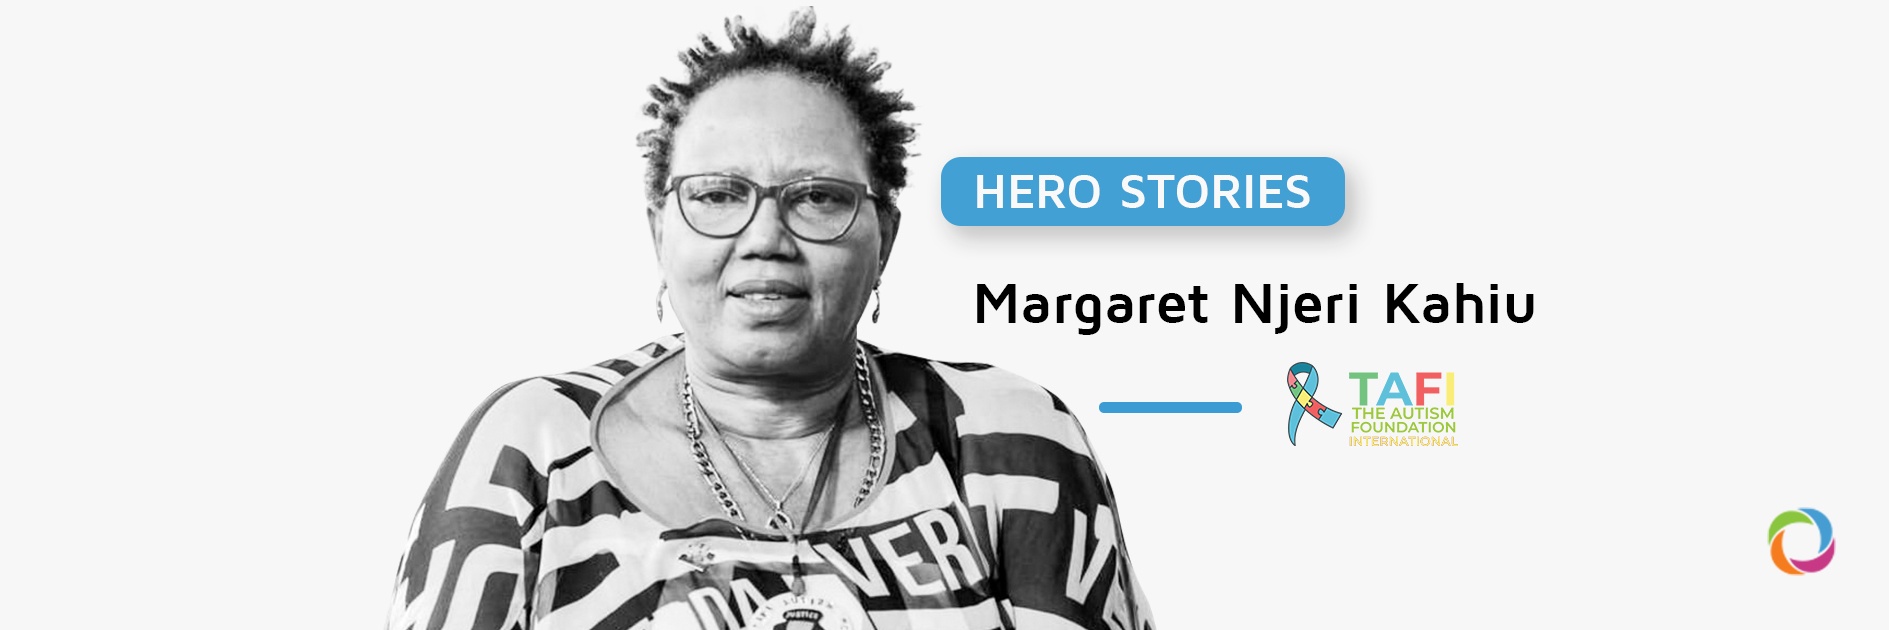 Hero Stories | Margaret Njeri Kahiu: Despite constant efforts, Kenya still lags behind in terms of assistance and healthcare for autistic children